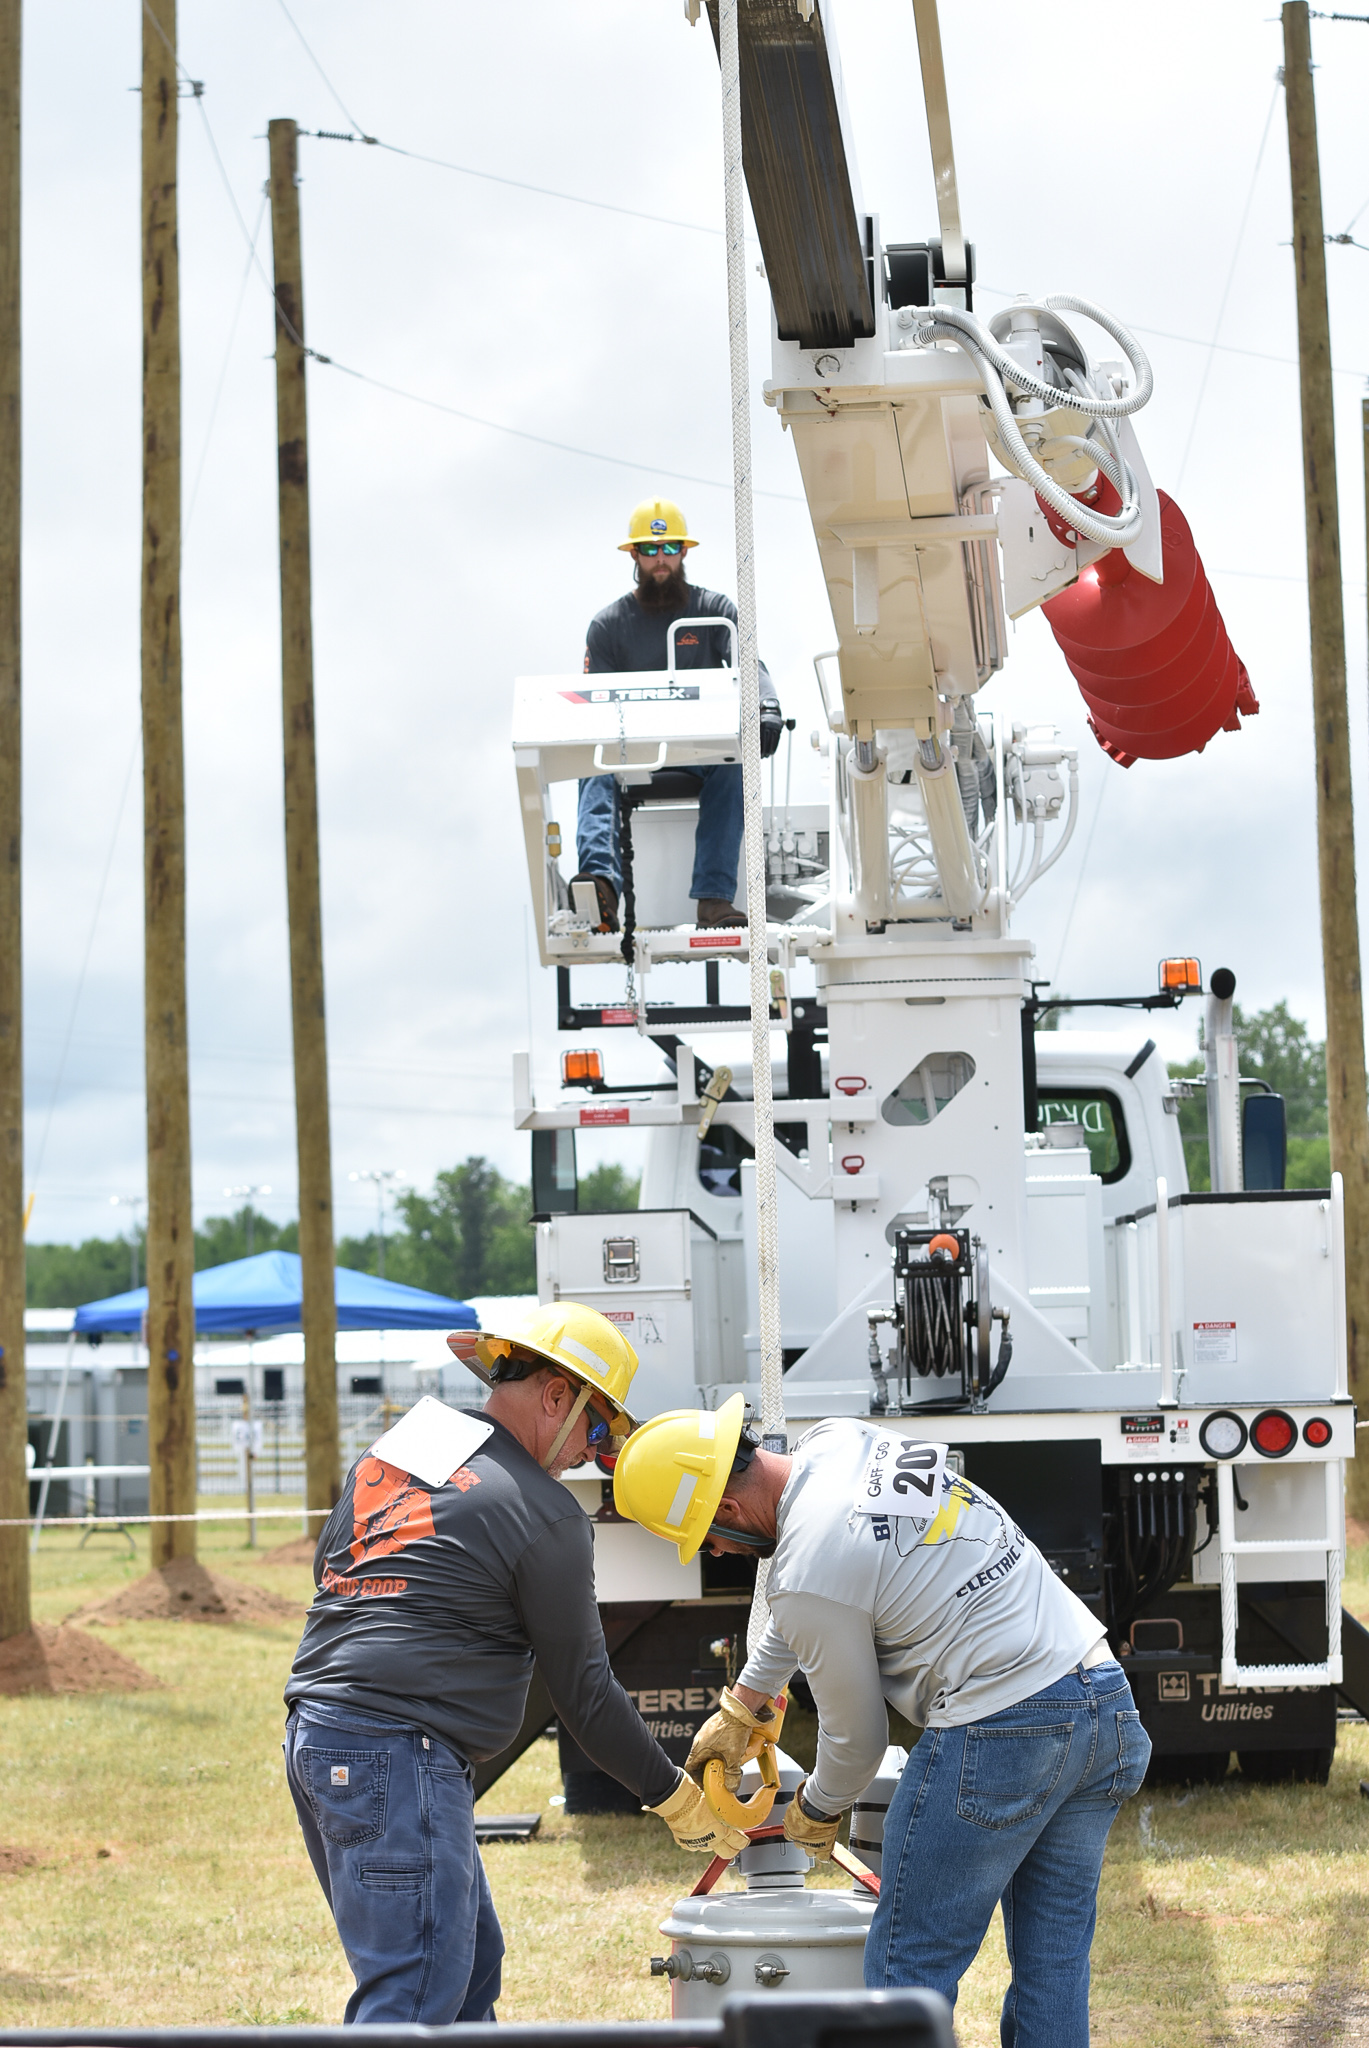 Blue Ridge Electric Cooperative compete during the Equipment Operator’s Rodeo competition at the 2022 Gaff-n-Go Lineworker’s Rodeo.